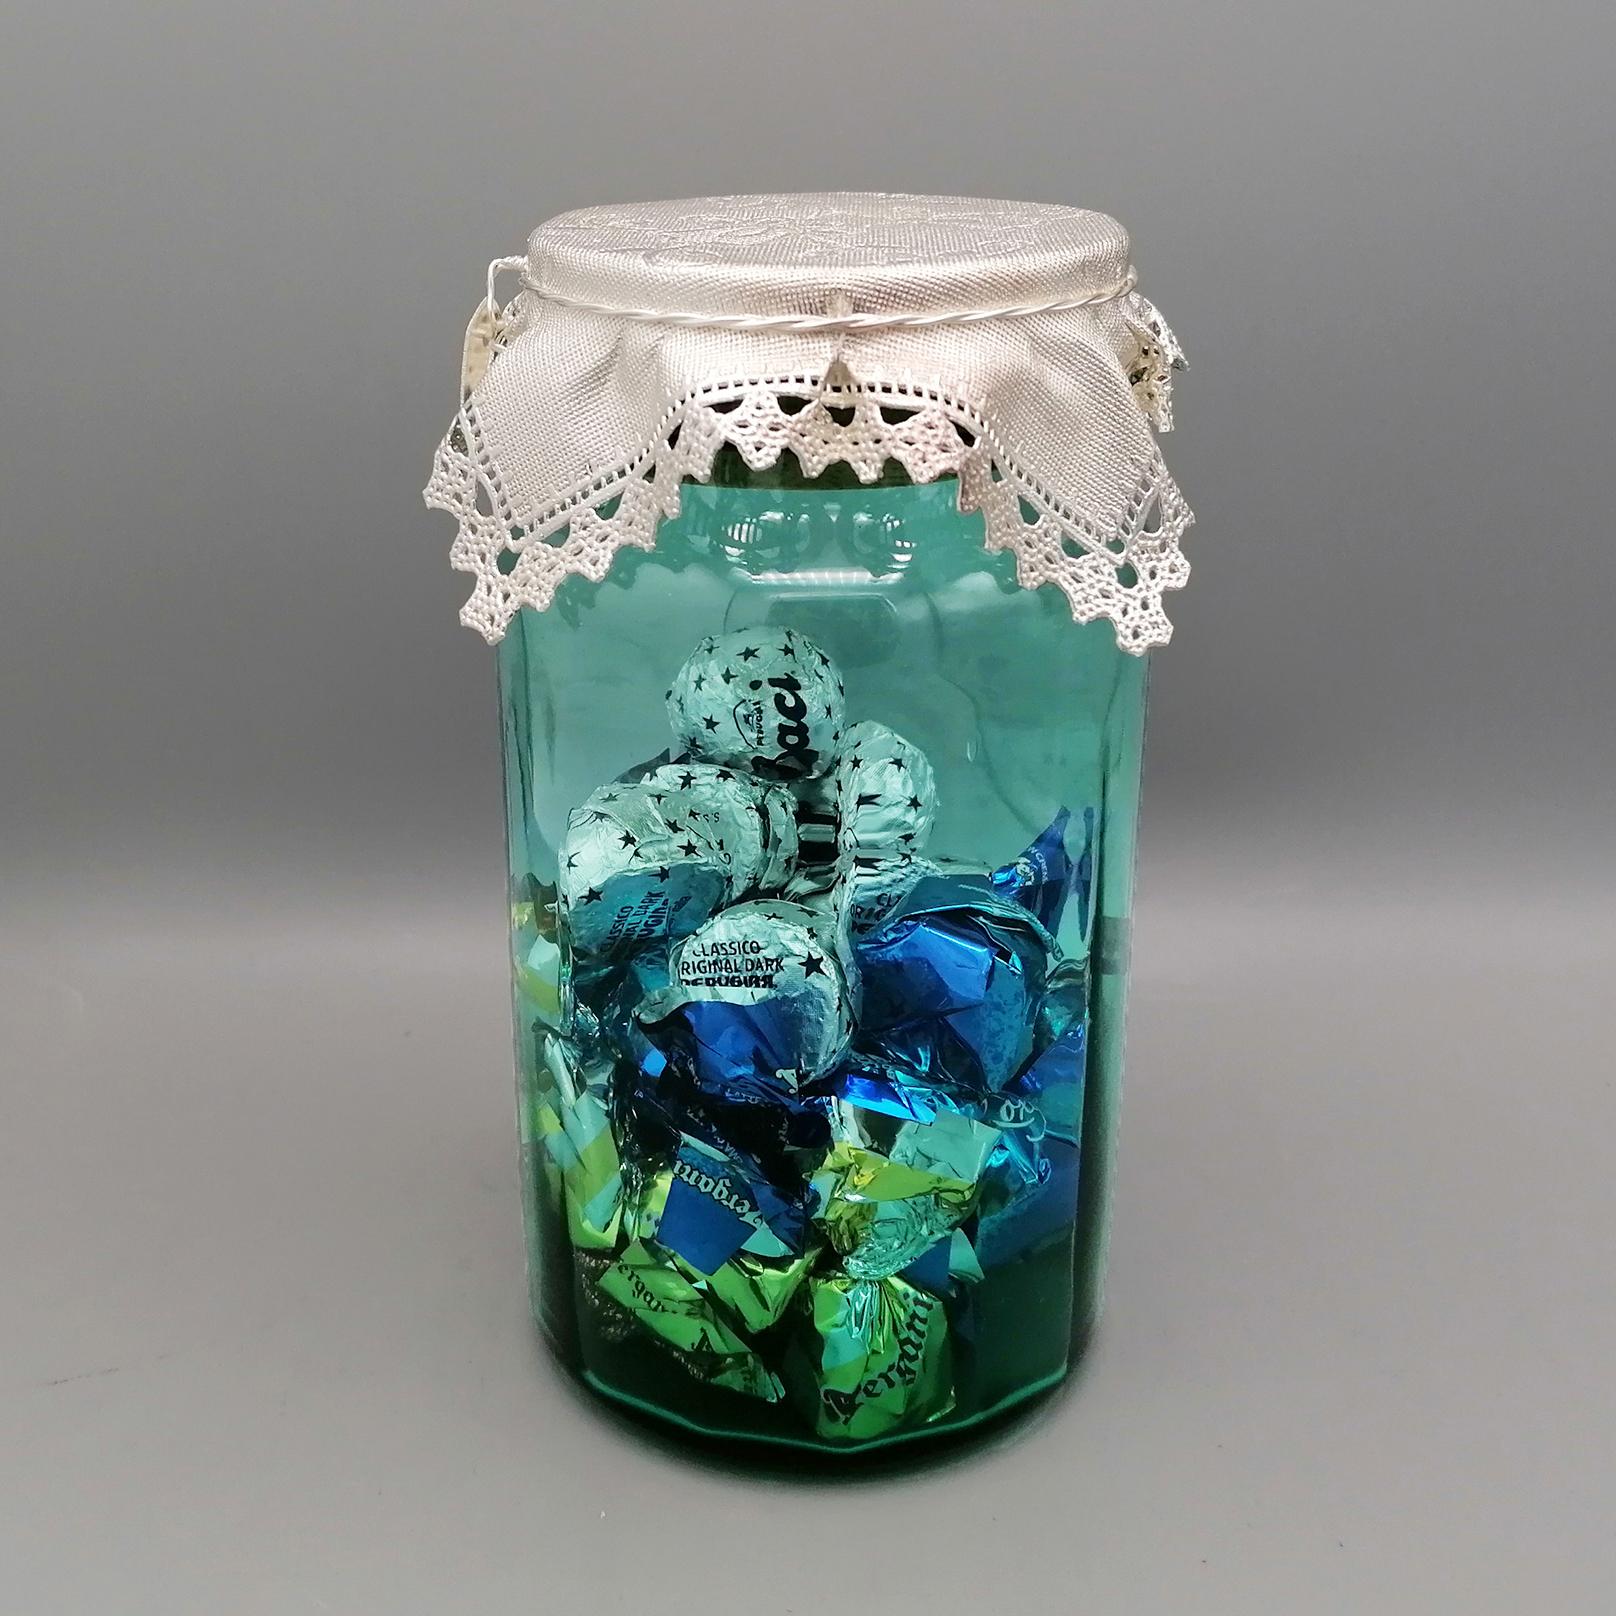 Green glass chocolate or sweets jar with 925 sterling silver lid in the shape of an embroidered handkerchief with lace border.

The jar, made of green optical glass, has a wooden cap completely covered in sterling silver in the shape of a small